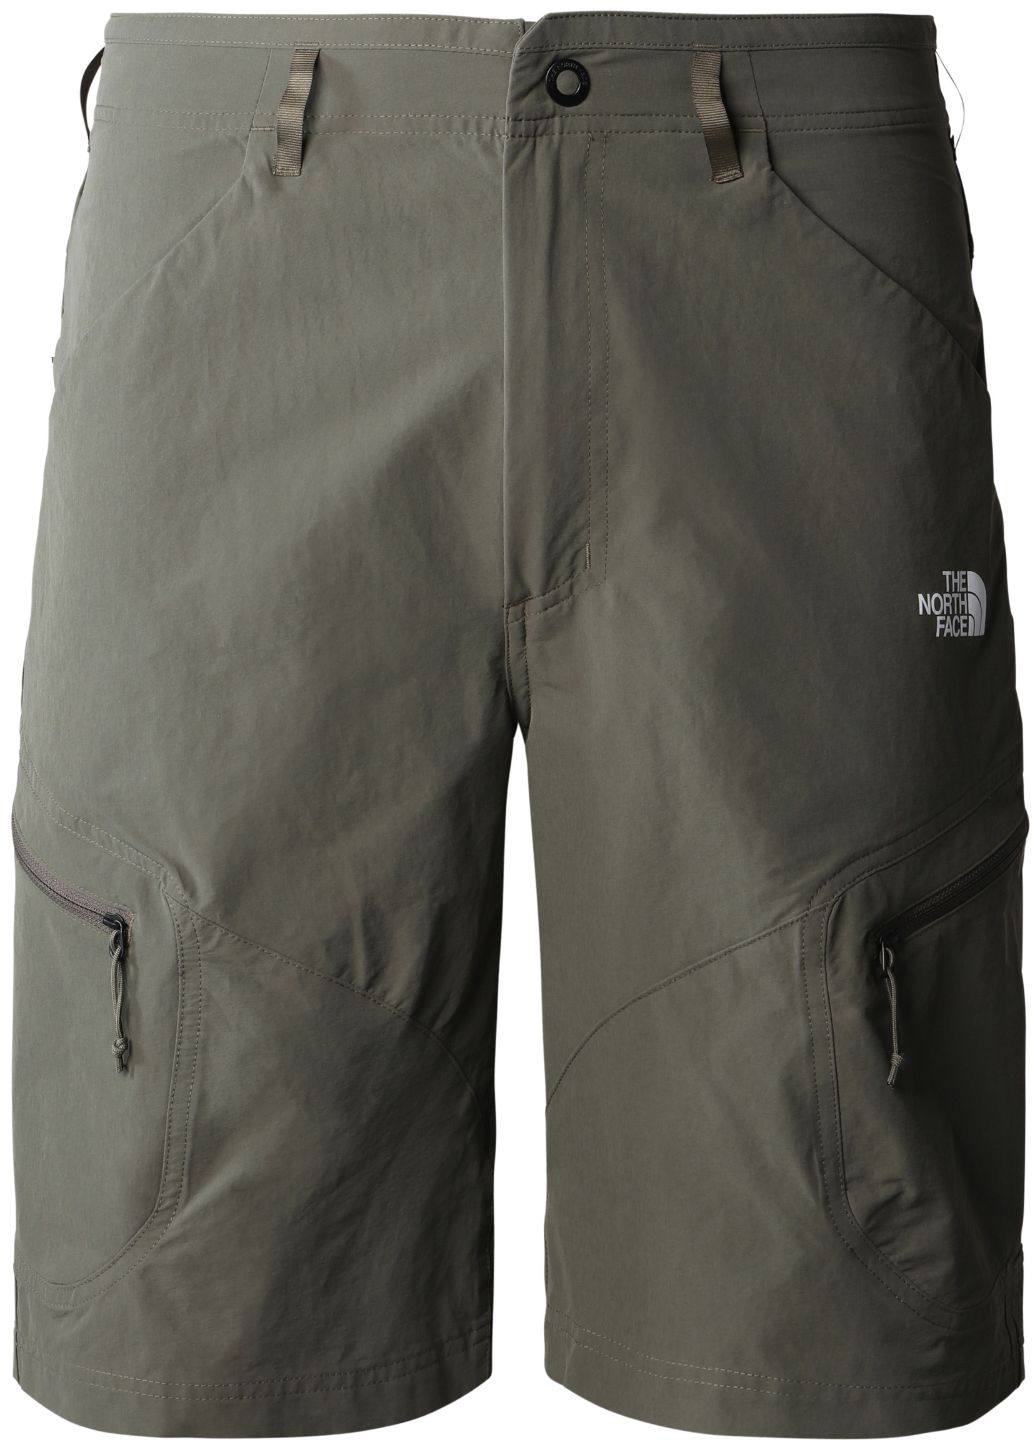 The North Face Exploration Short Taupe 28